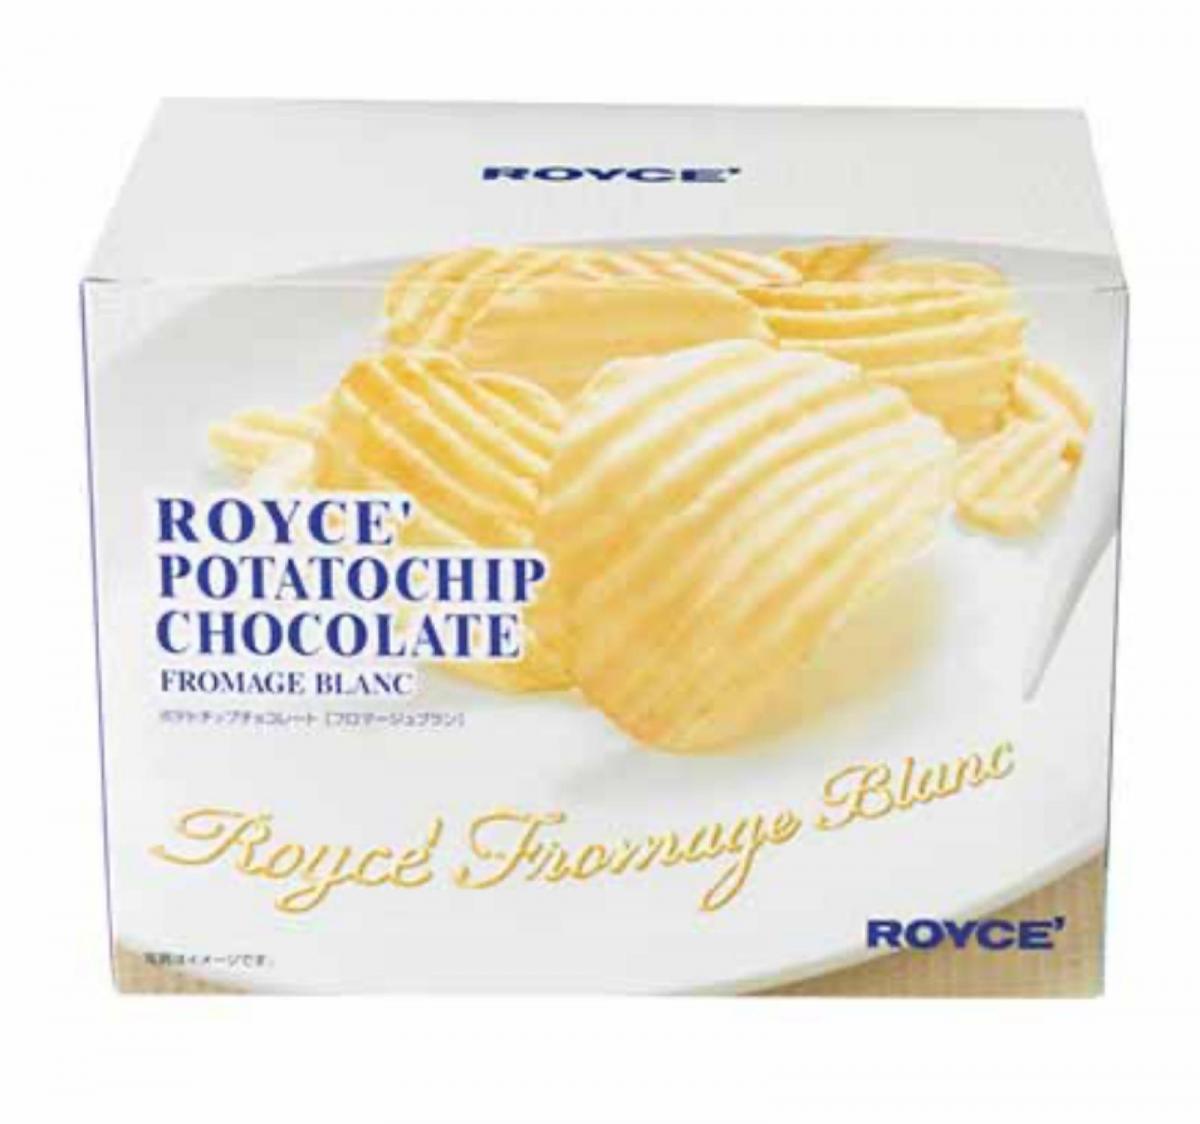 ROYCE' Potatochip - White Chocolate & Cheese (190g) JAPAN Parallel Import Best Before 24-02-2024